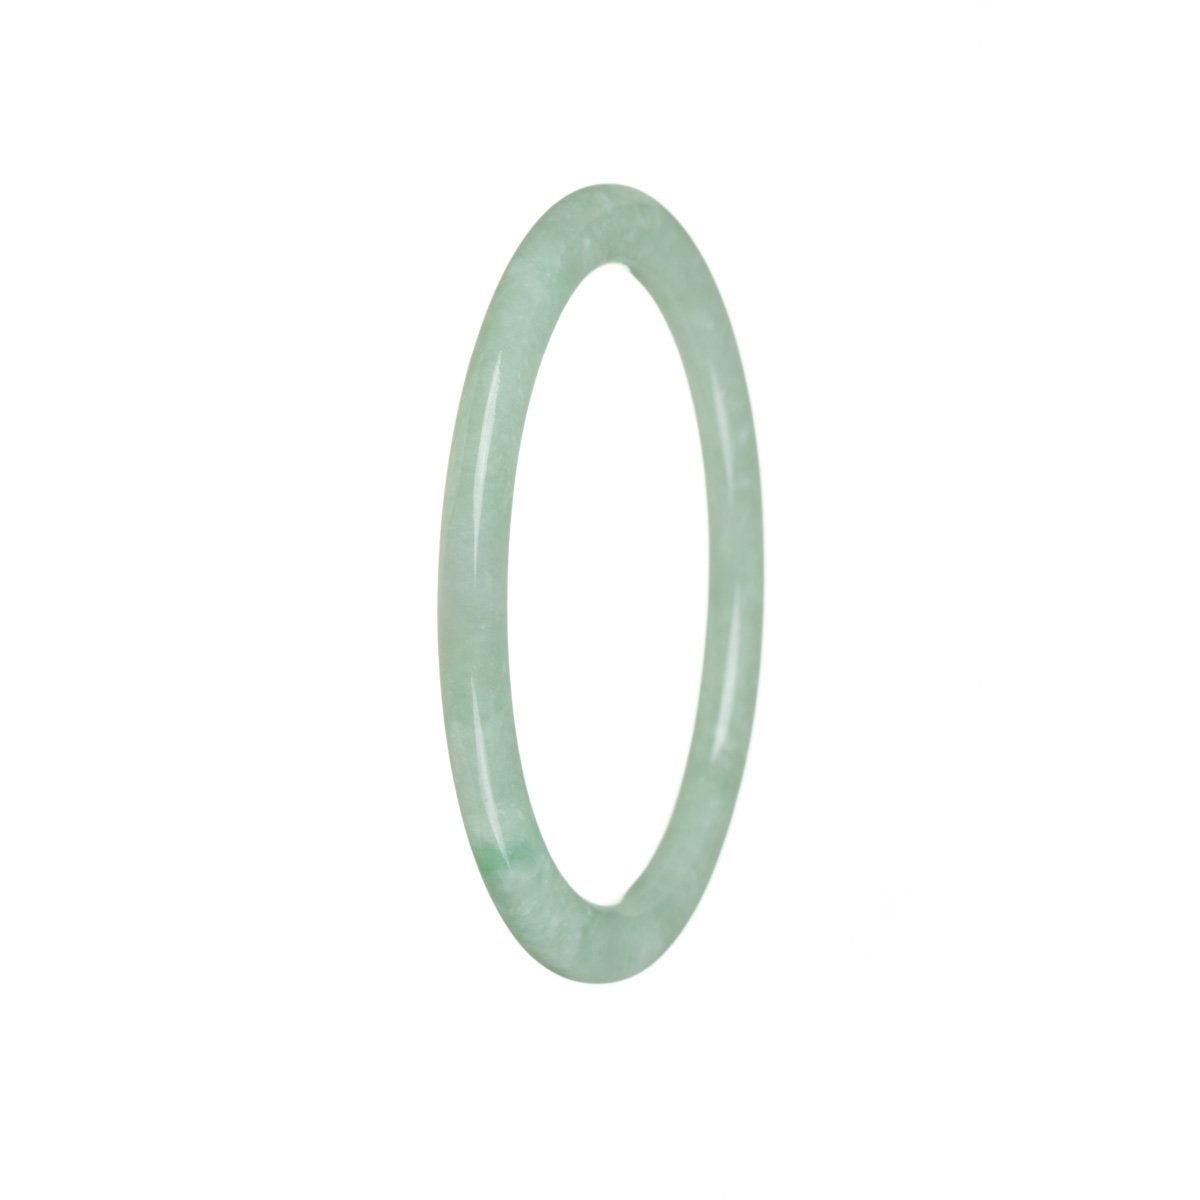 A close-up image of a beautiful oval-shaped jade bangle bracelet. The jade is of high quality and has a vibrant green color. The bracelet is 57mm in diameter and is expertly crafted. It is a stunning piece of jewelry.